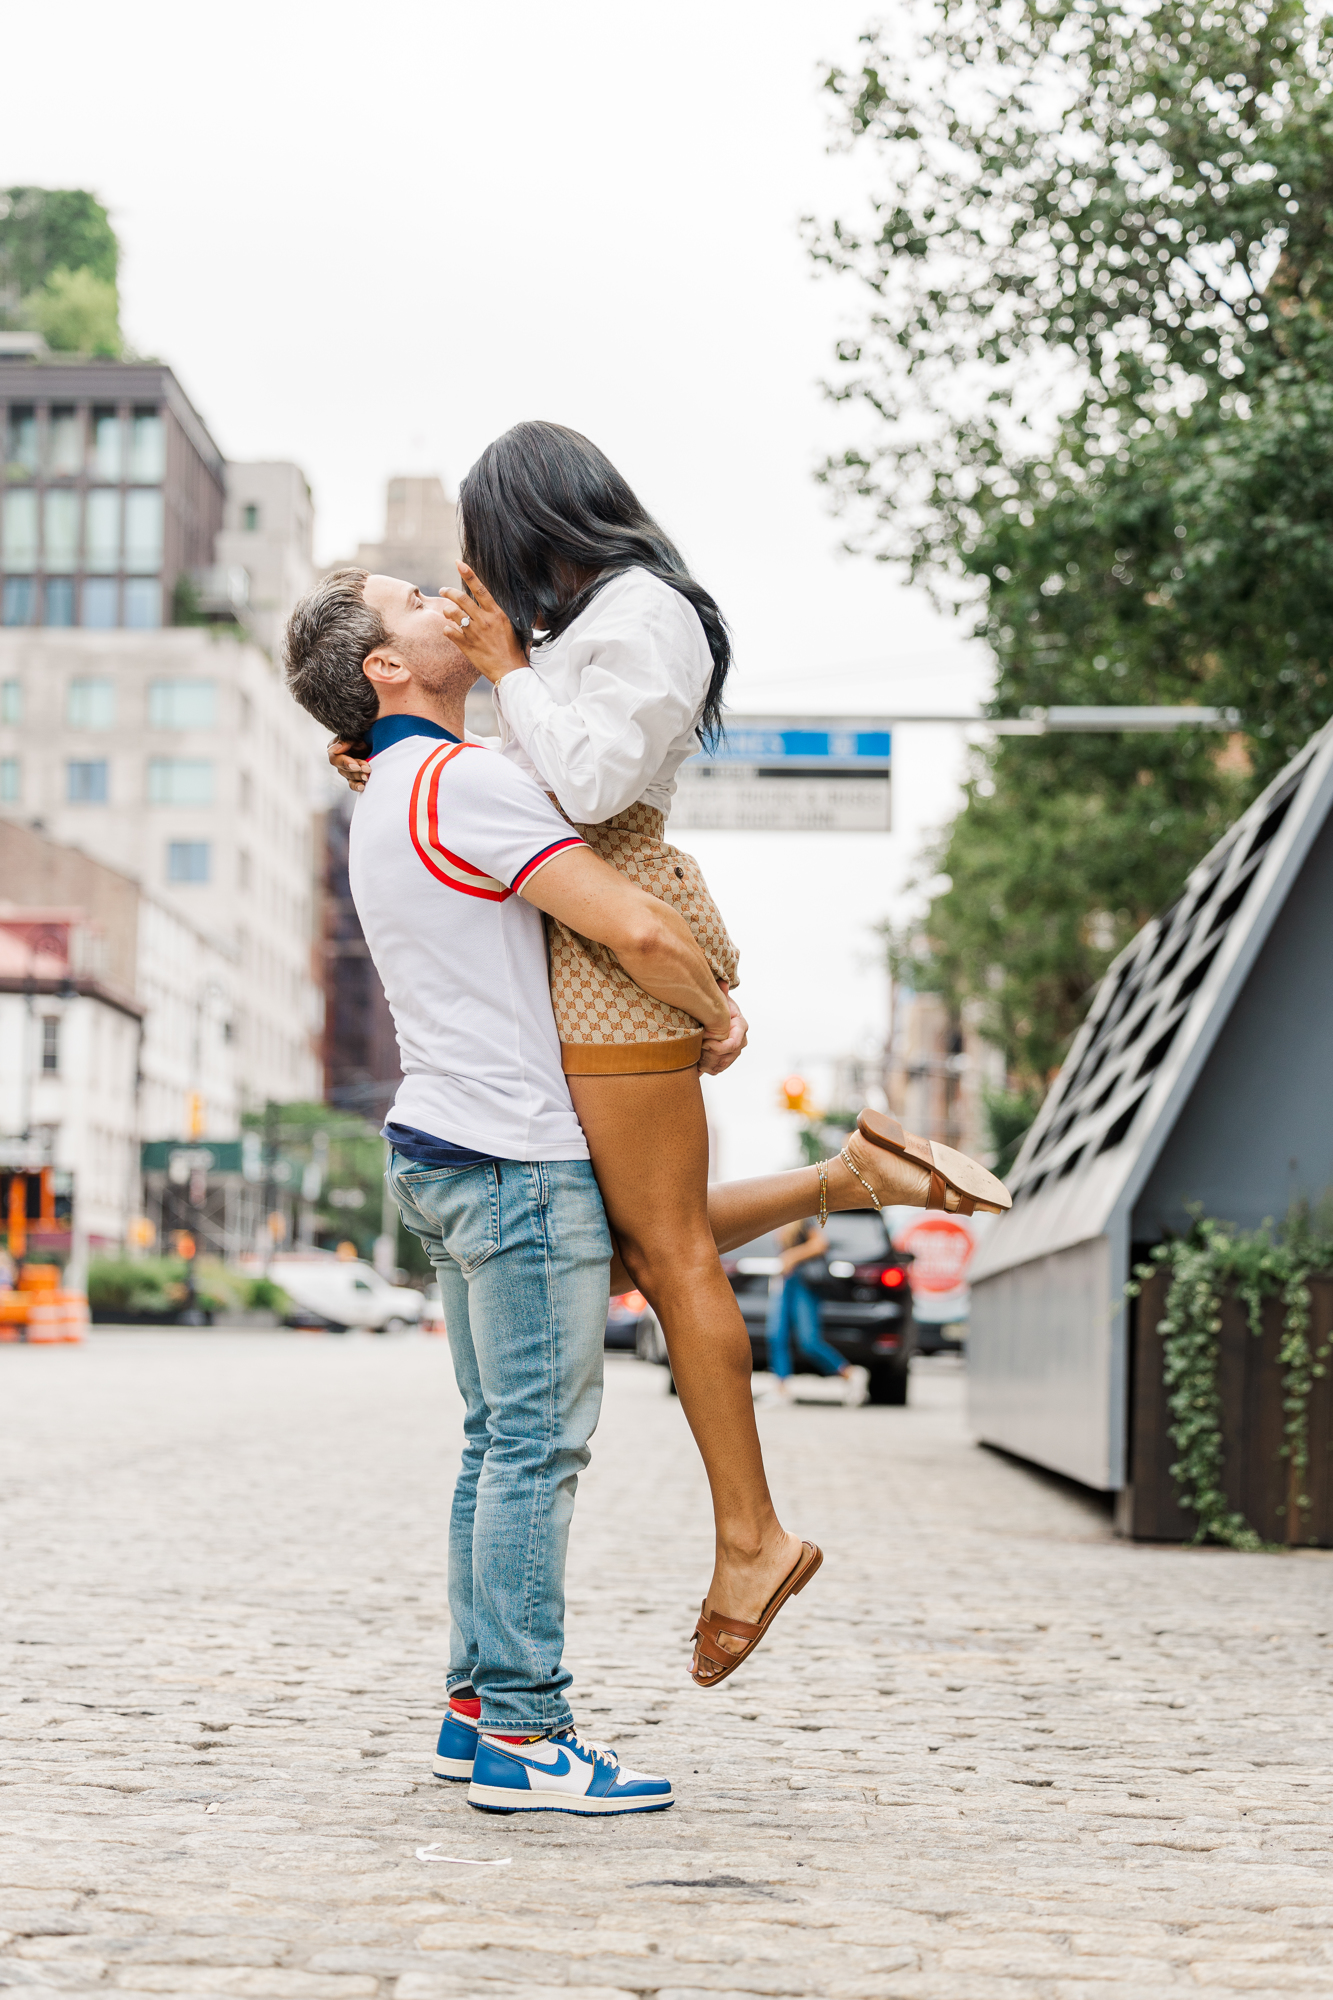 Charming Meatpacking District Engagement Photos